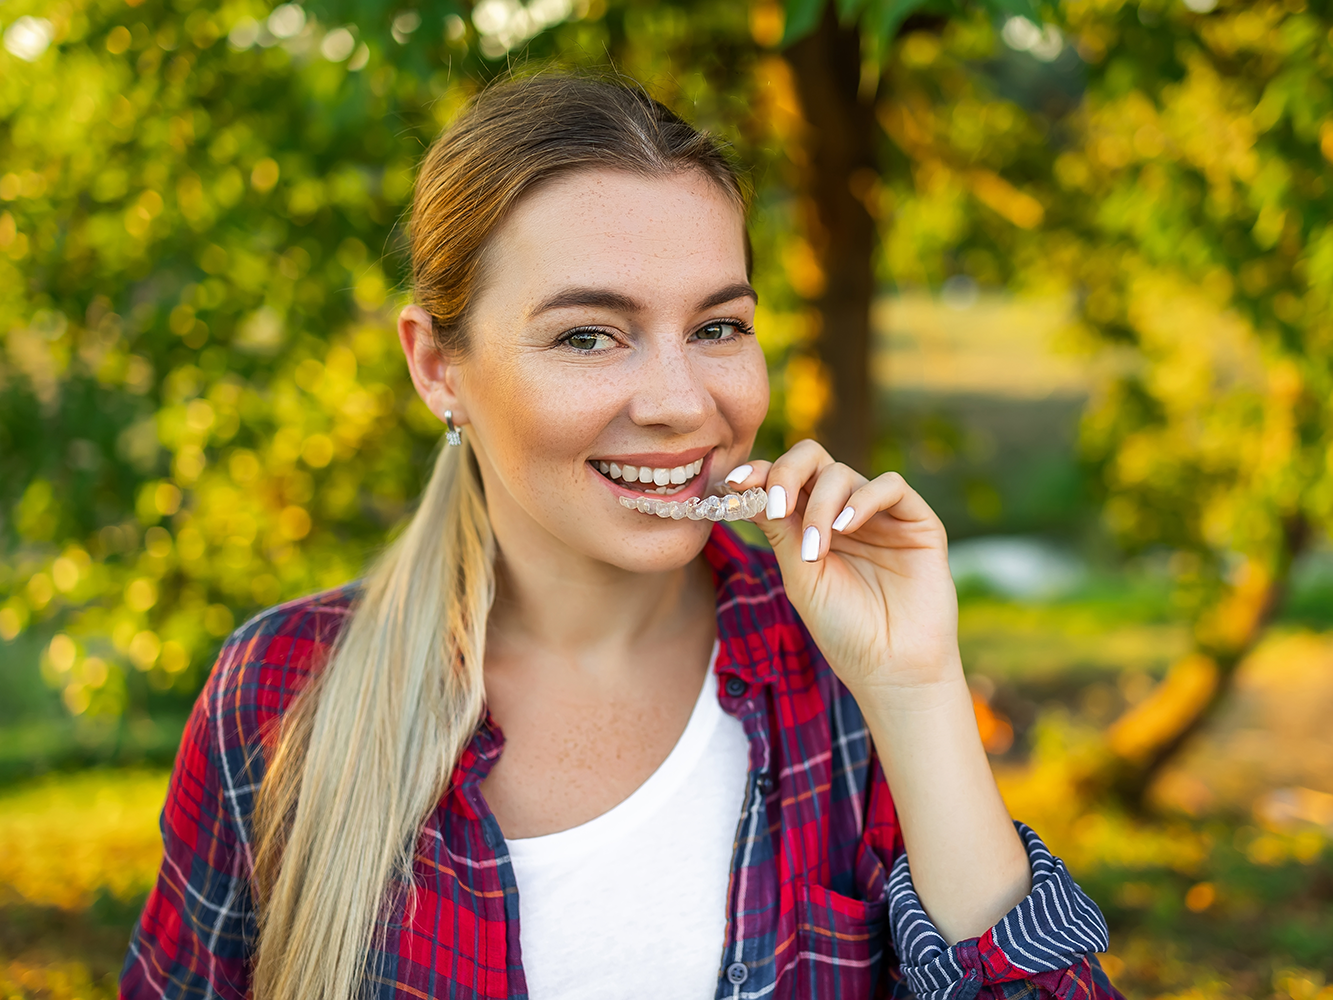 girl standing outside smiling holding a clear aligner tray and smiling while placing the tray in her mouth